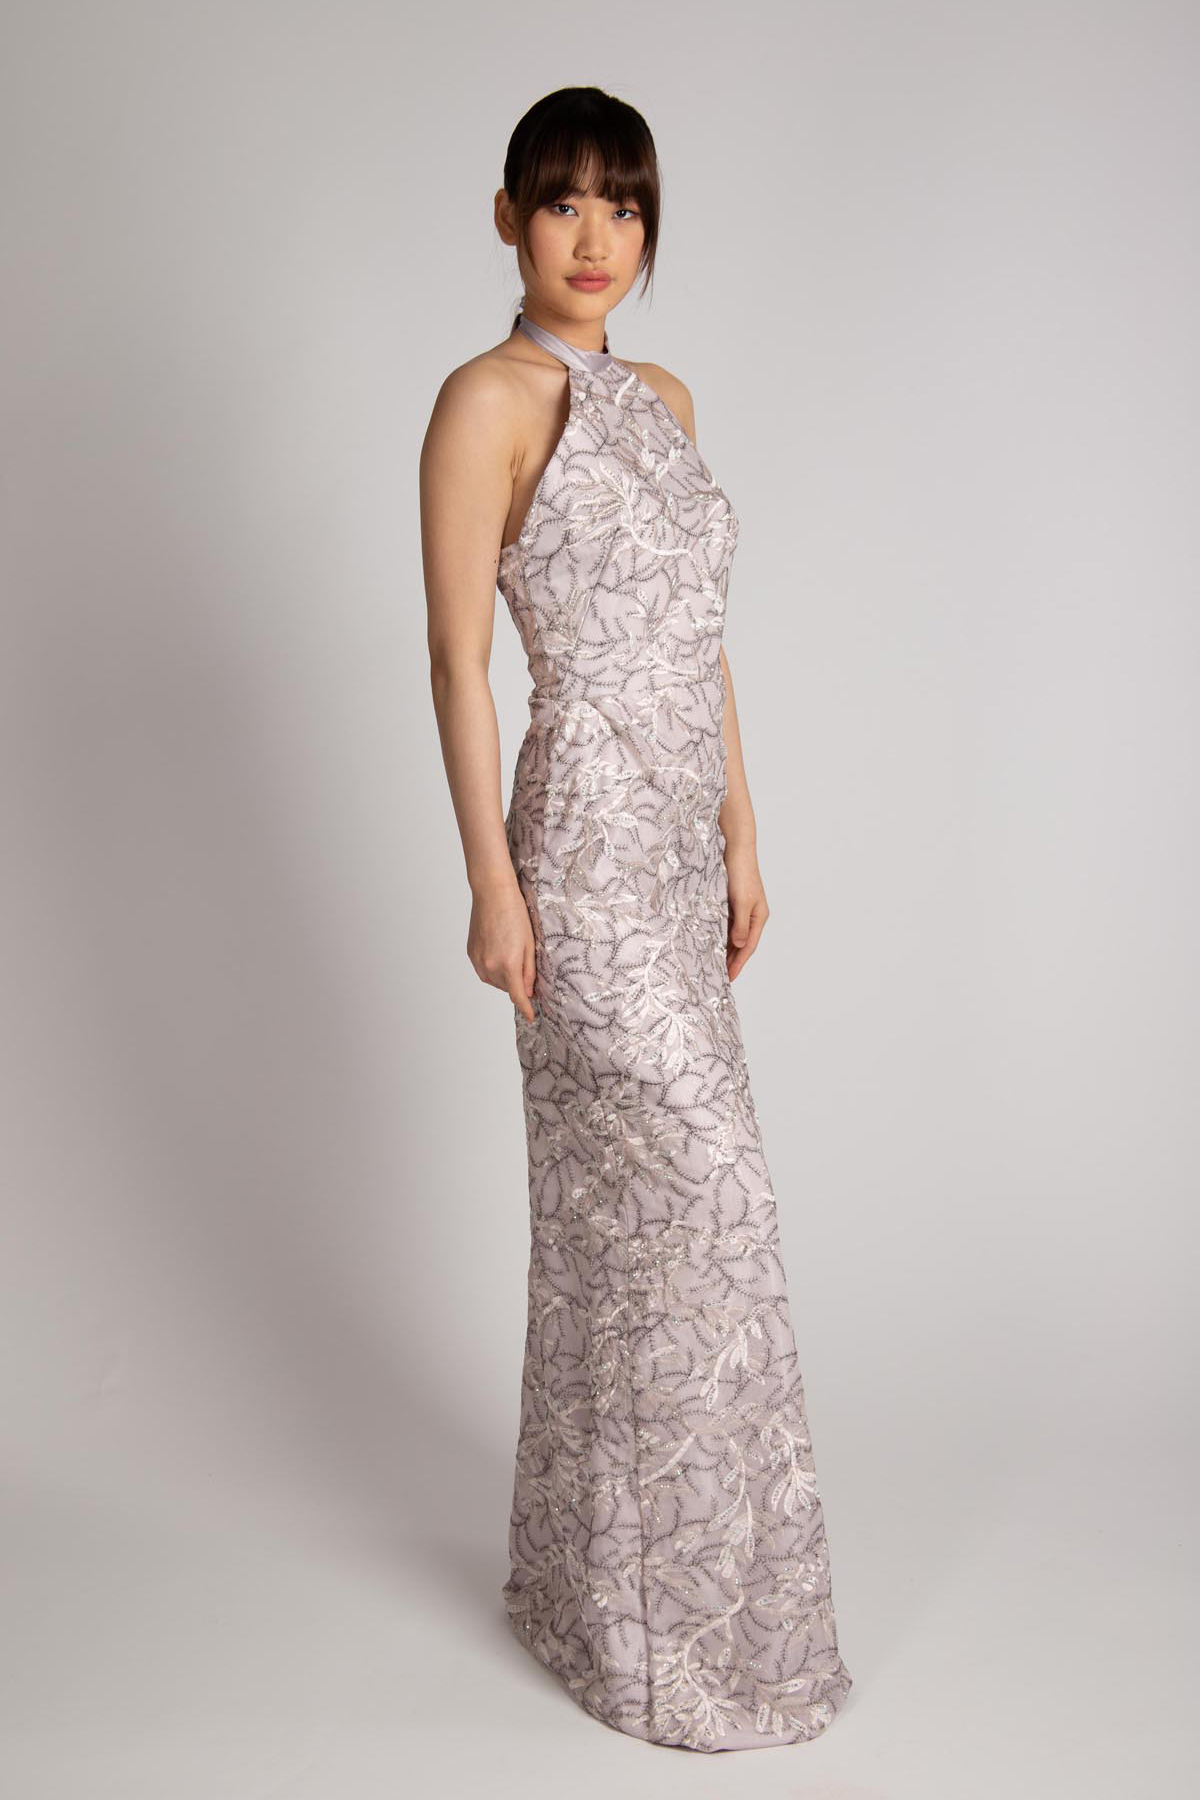 Hongman Li models a silver violet evening gown with low cut back made of tulle with embroidery.